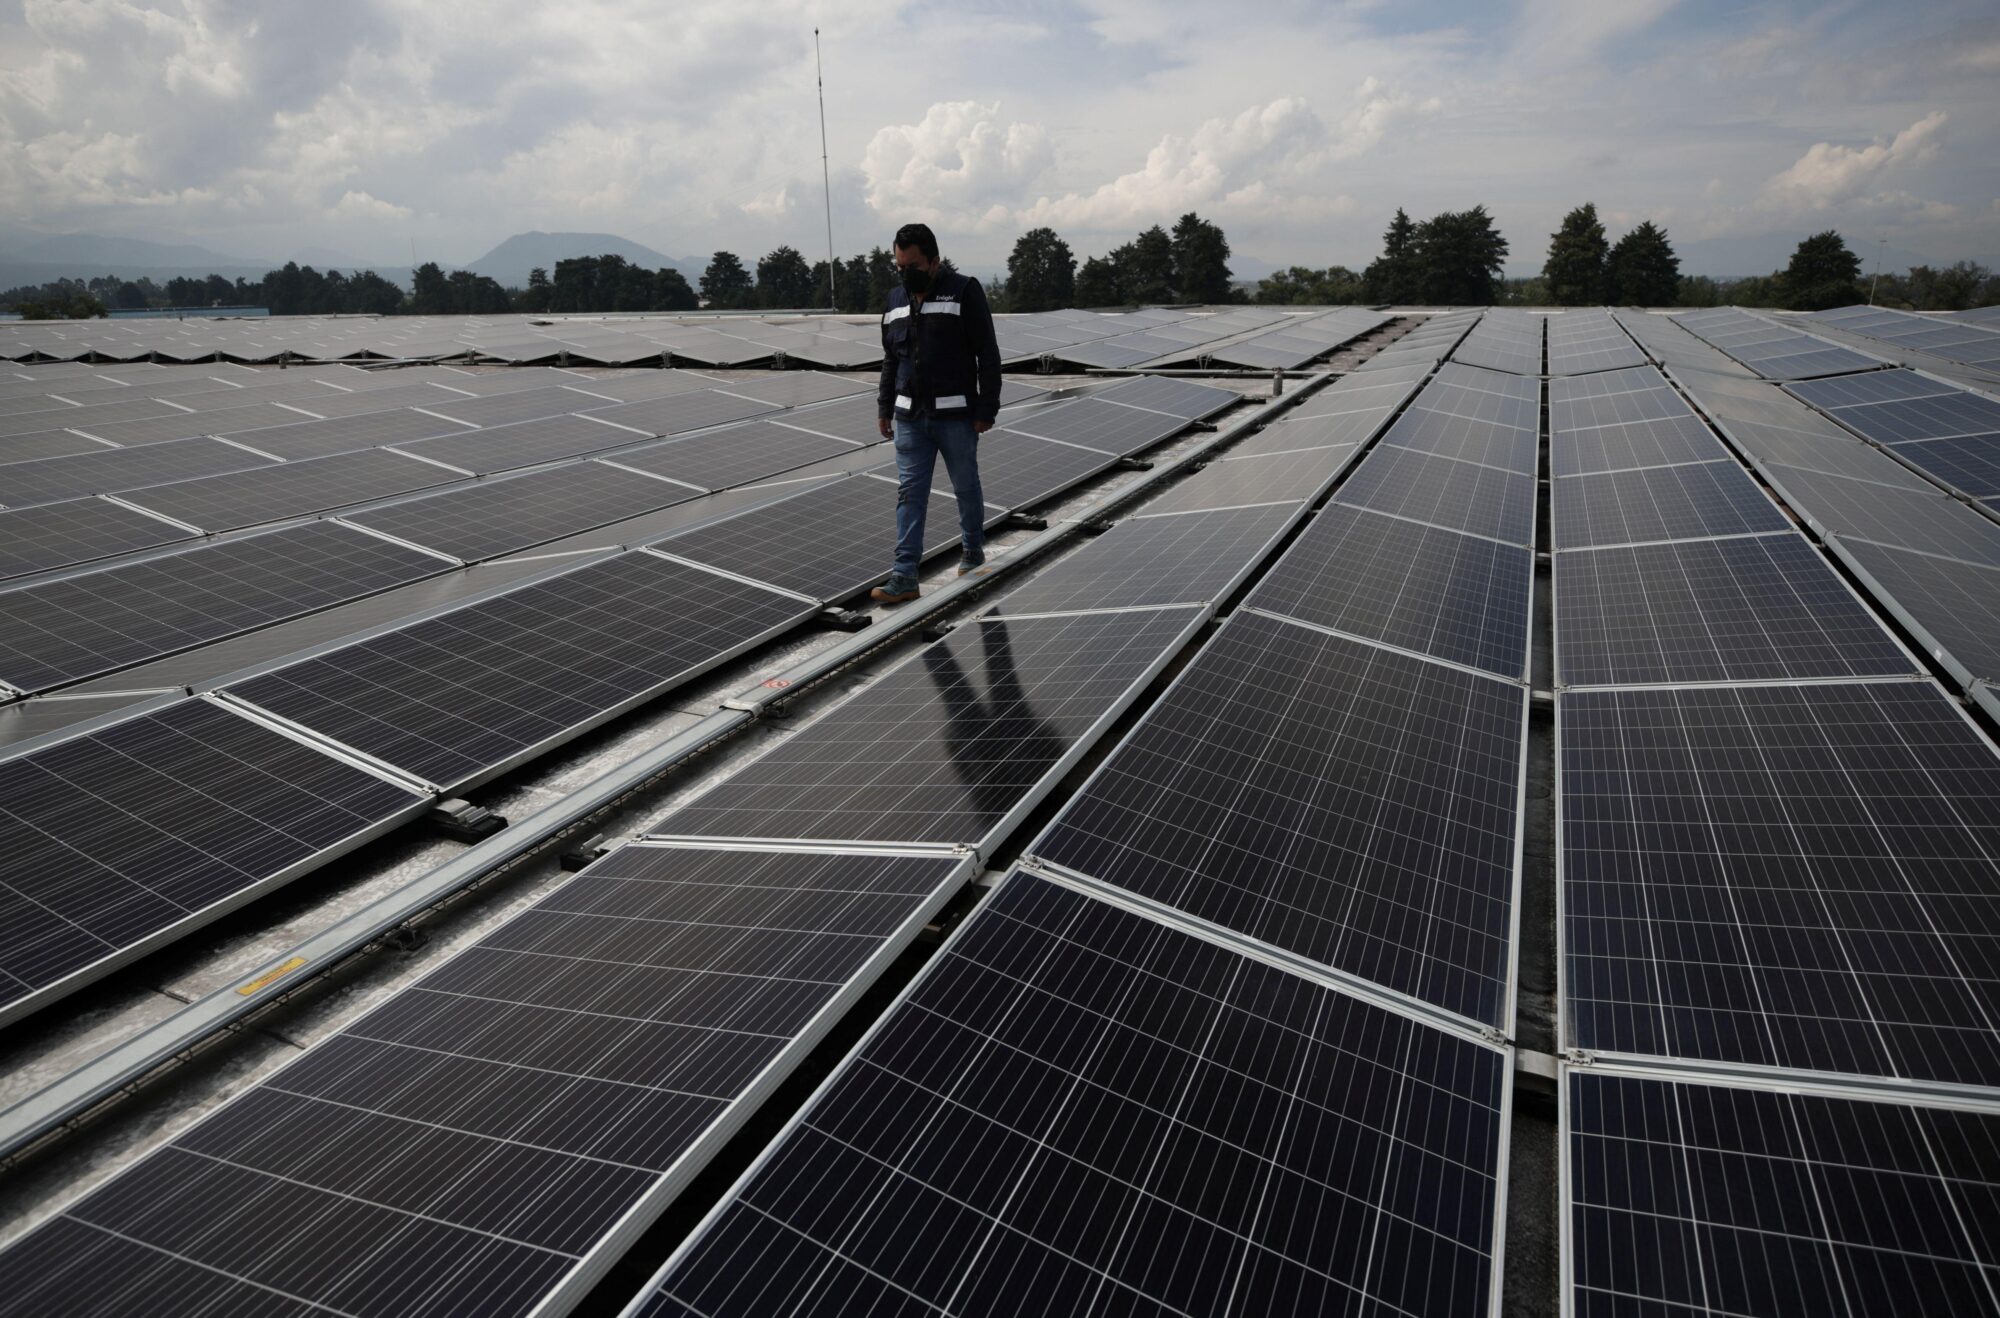 <p>An engineer inspects solar panels in Mexico state, Mexico. The country’s newly released energy plan includes the construction of what will be the largest solar power plant in Latin America (Image: Henry Romero / Alamy)</p>